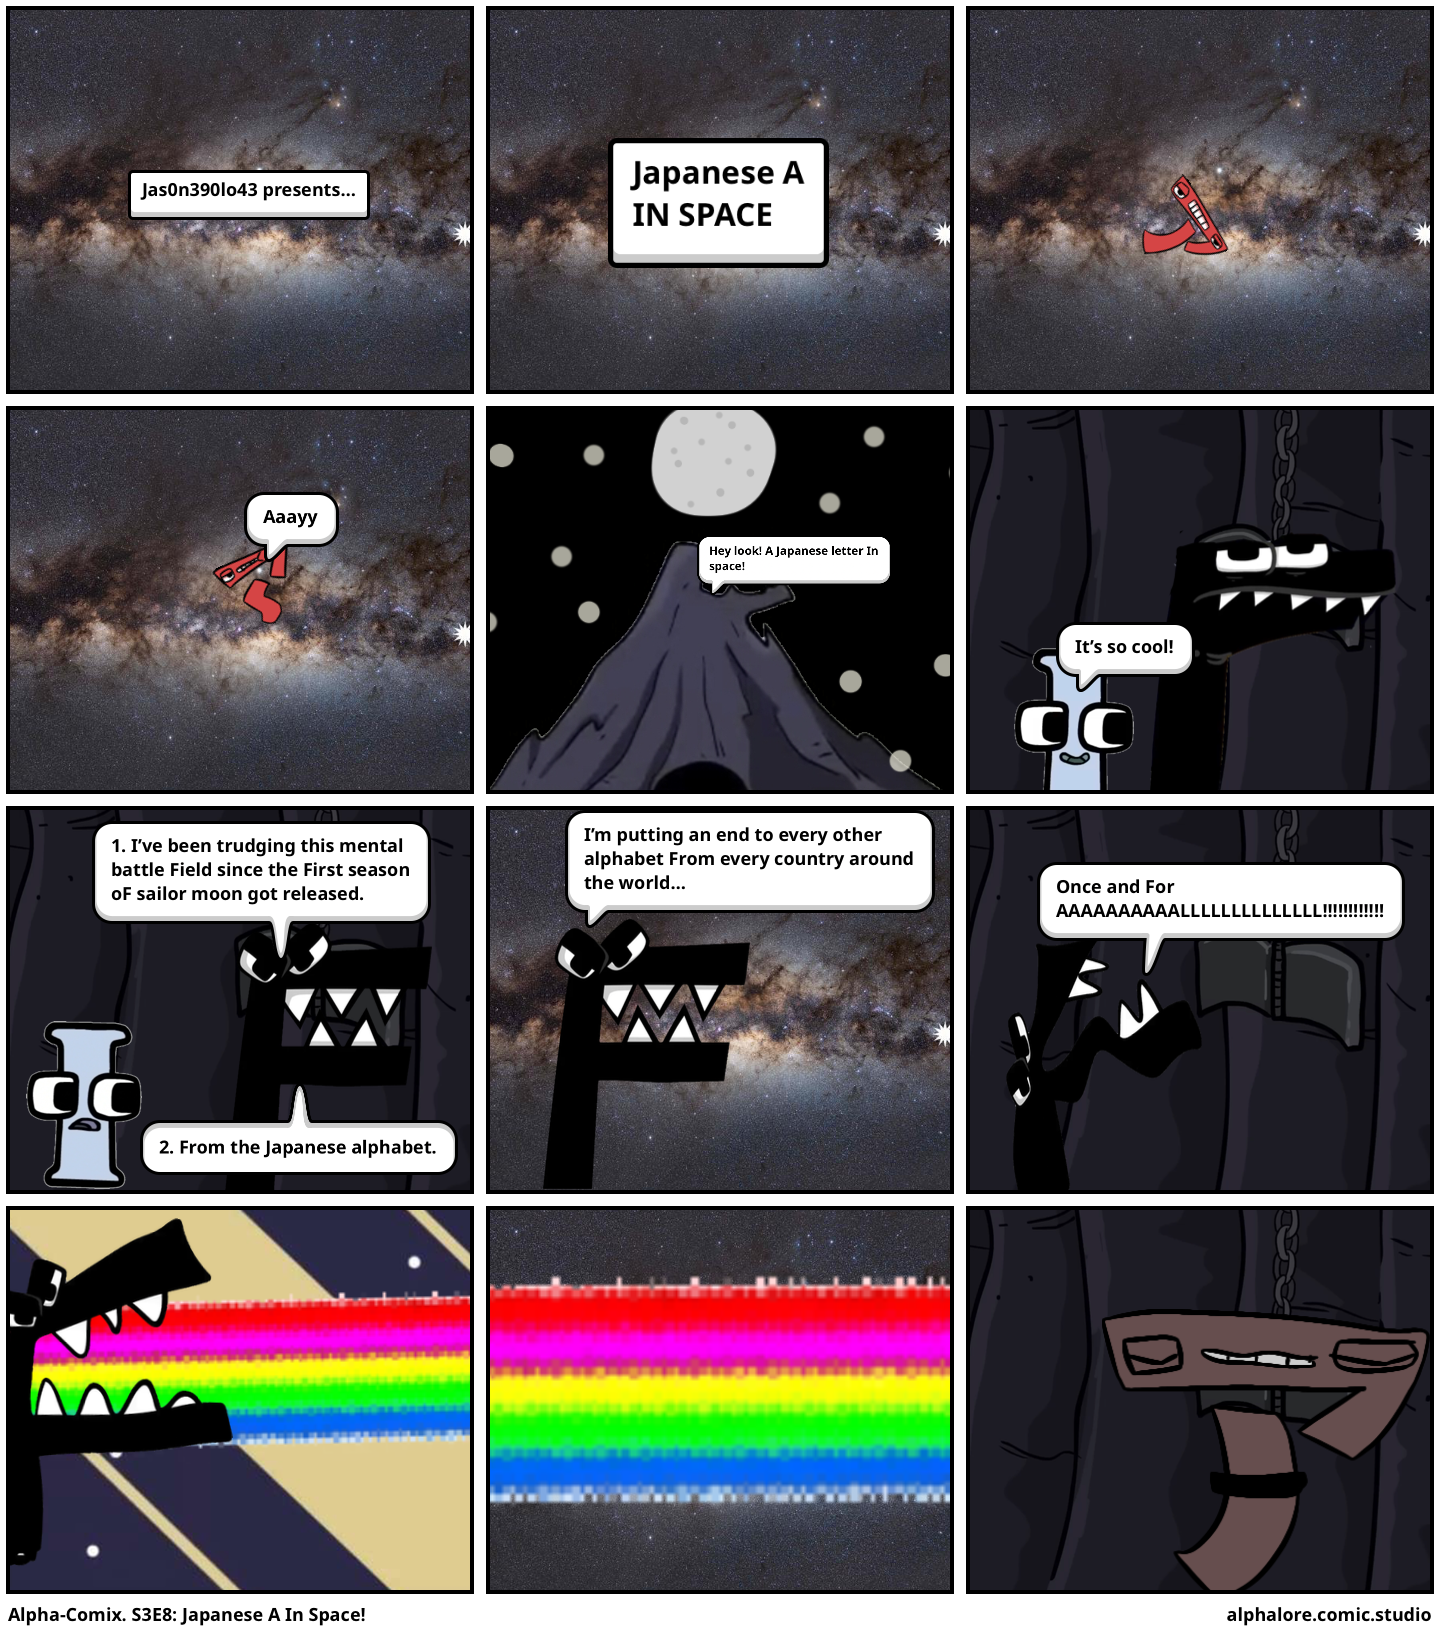 Alpha-Comix. S3E8: Japanese A In Space!